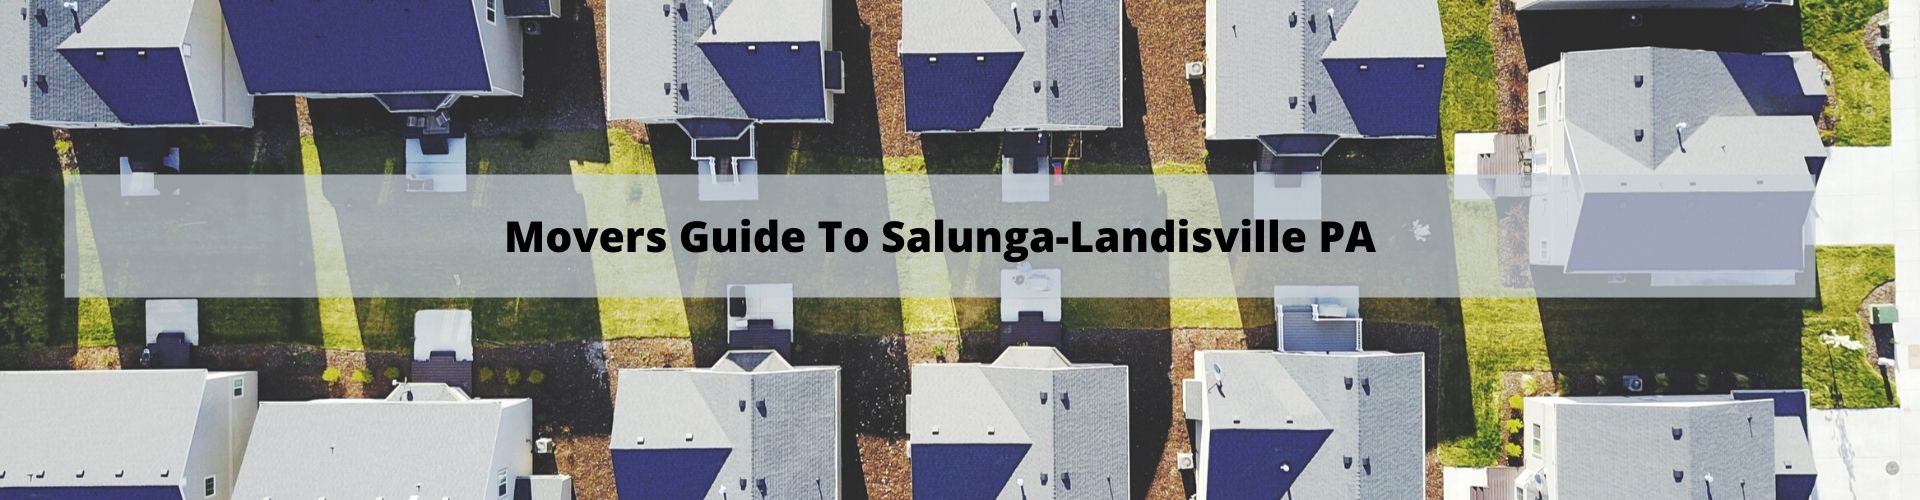 Mover's Guide to Salunga-Landisville PA